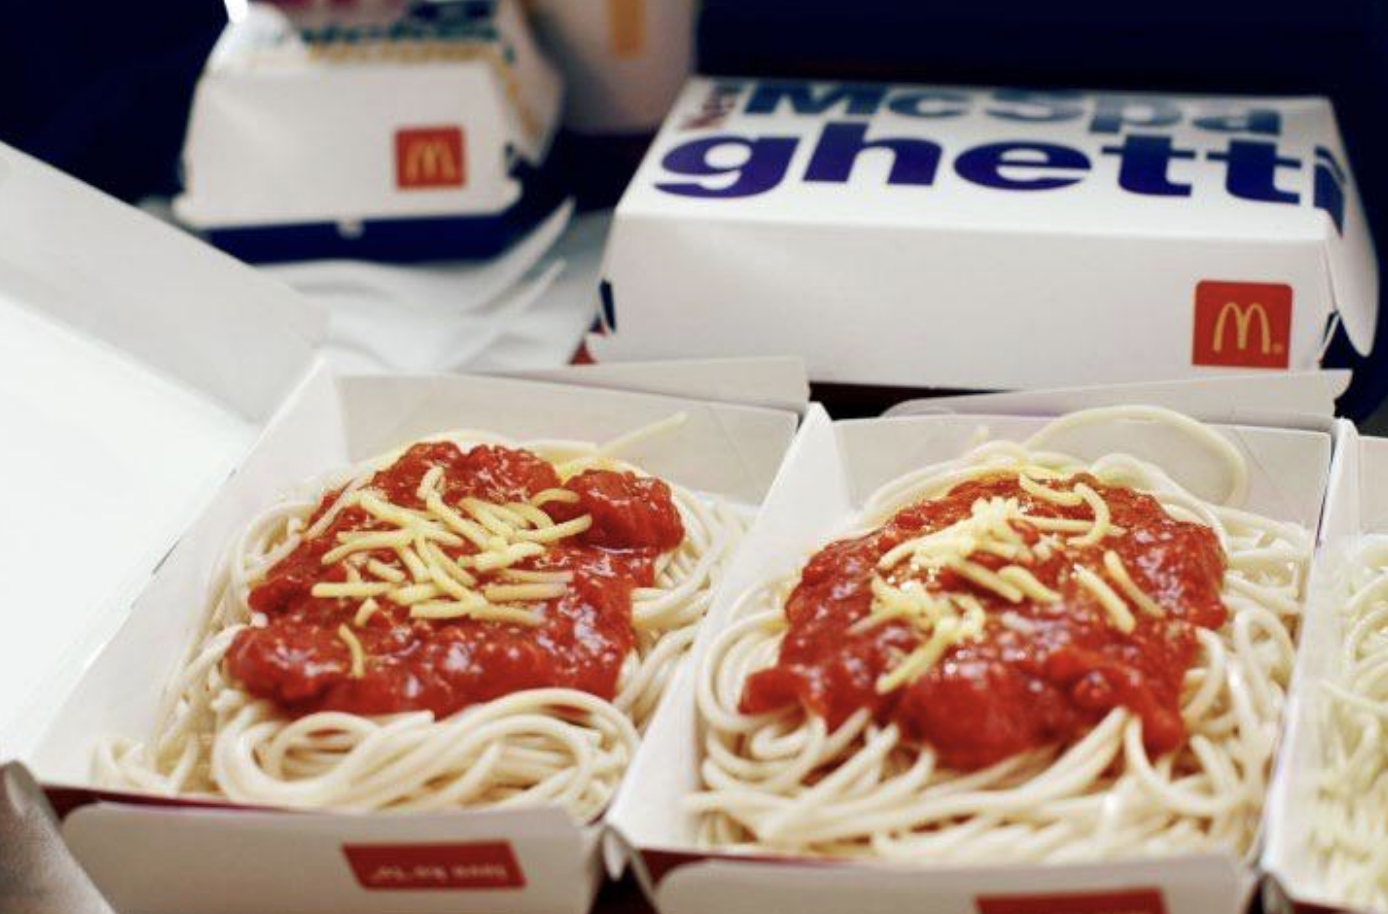 Spaghetti, red sauce, and cheese in a takeout box